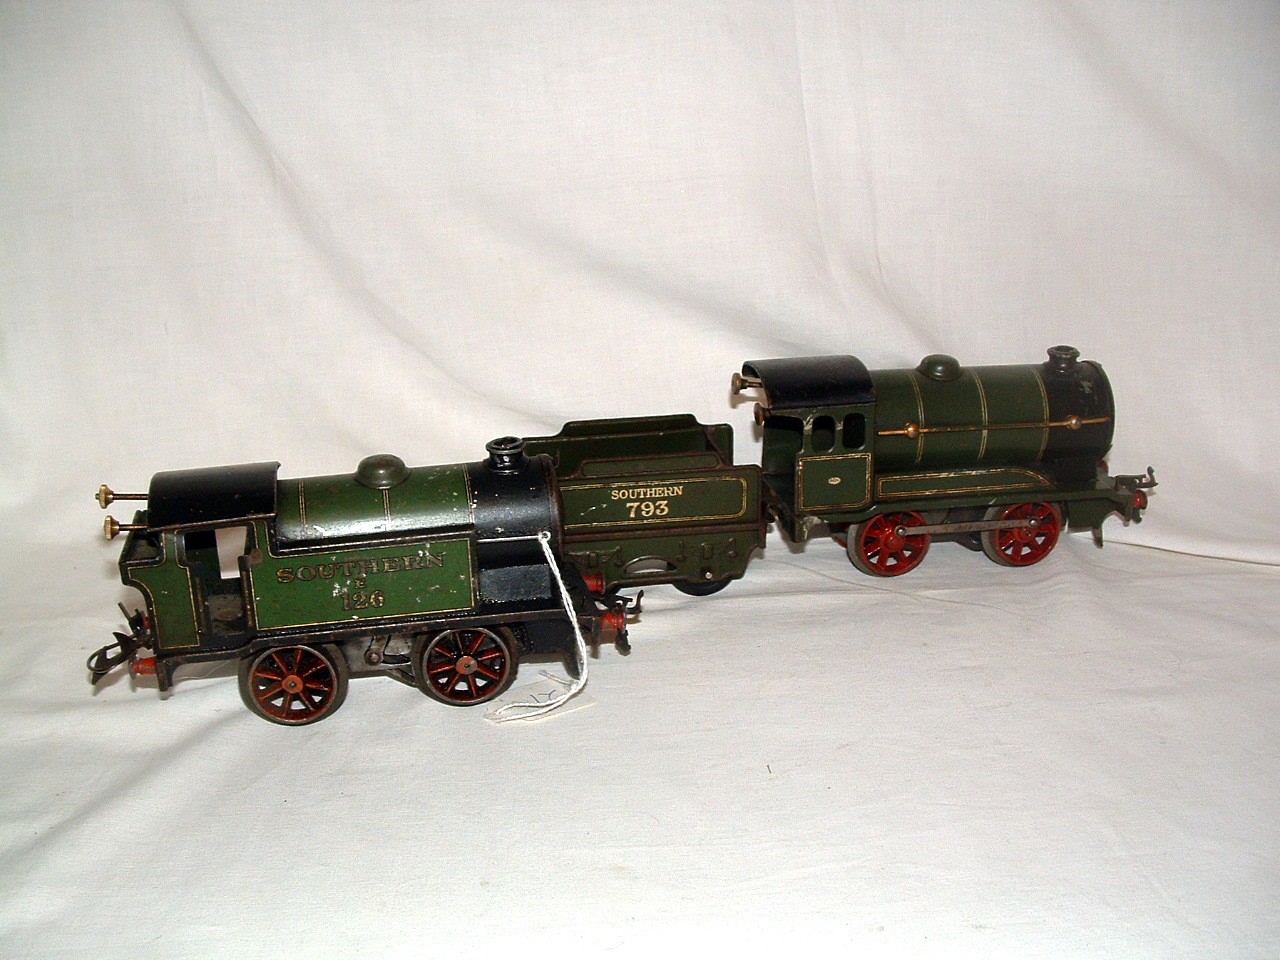 HORNBY 0 Gauge 2 x C/W Southern Green locomotives - No 0 0-4-0 no 793 and Tender c 1938 - - Image 2 of 2